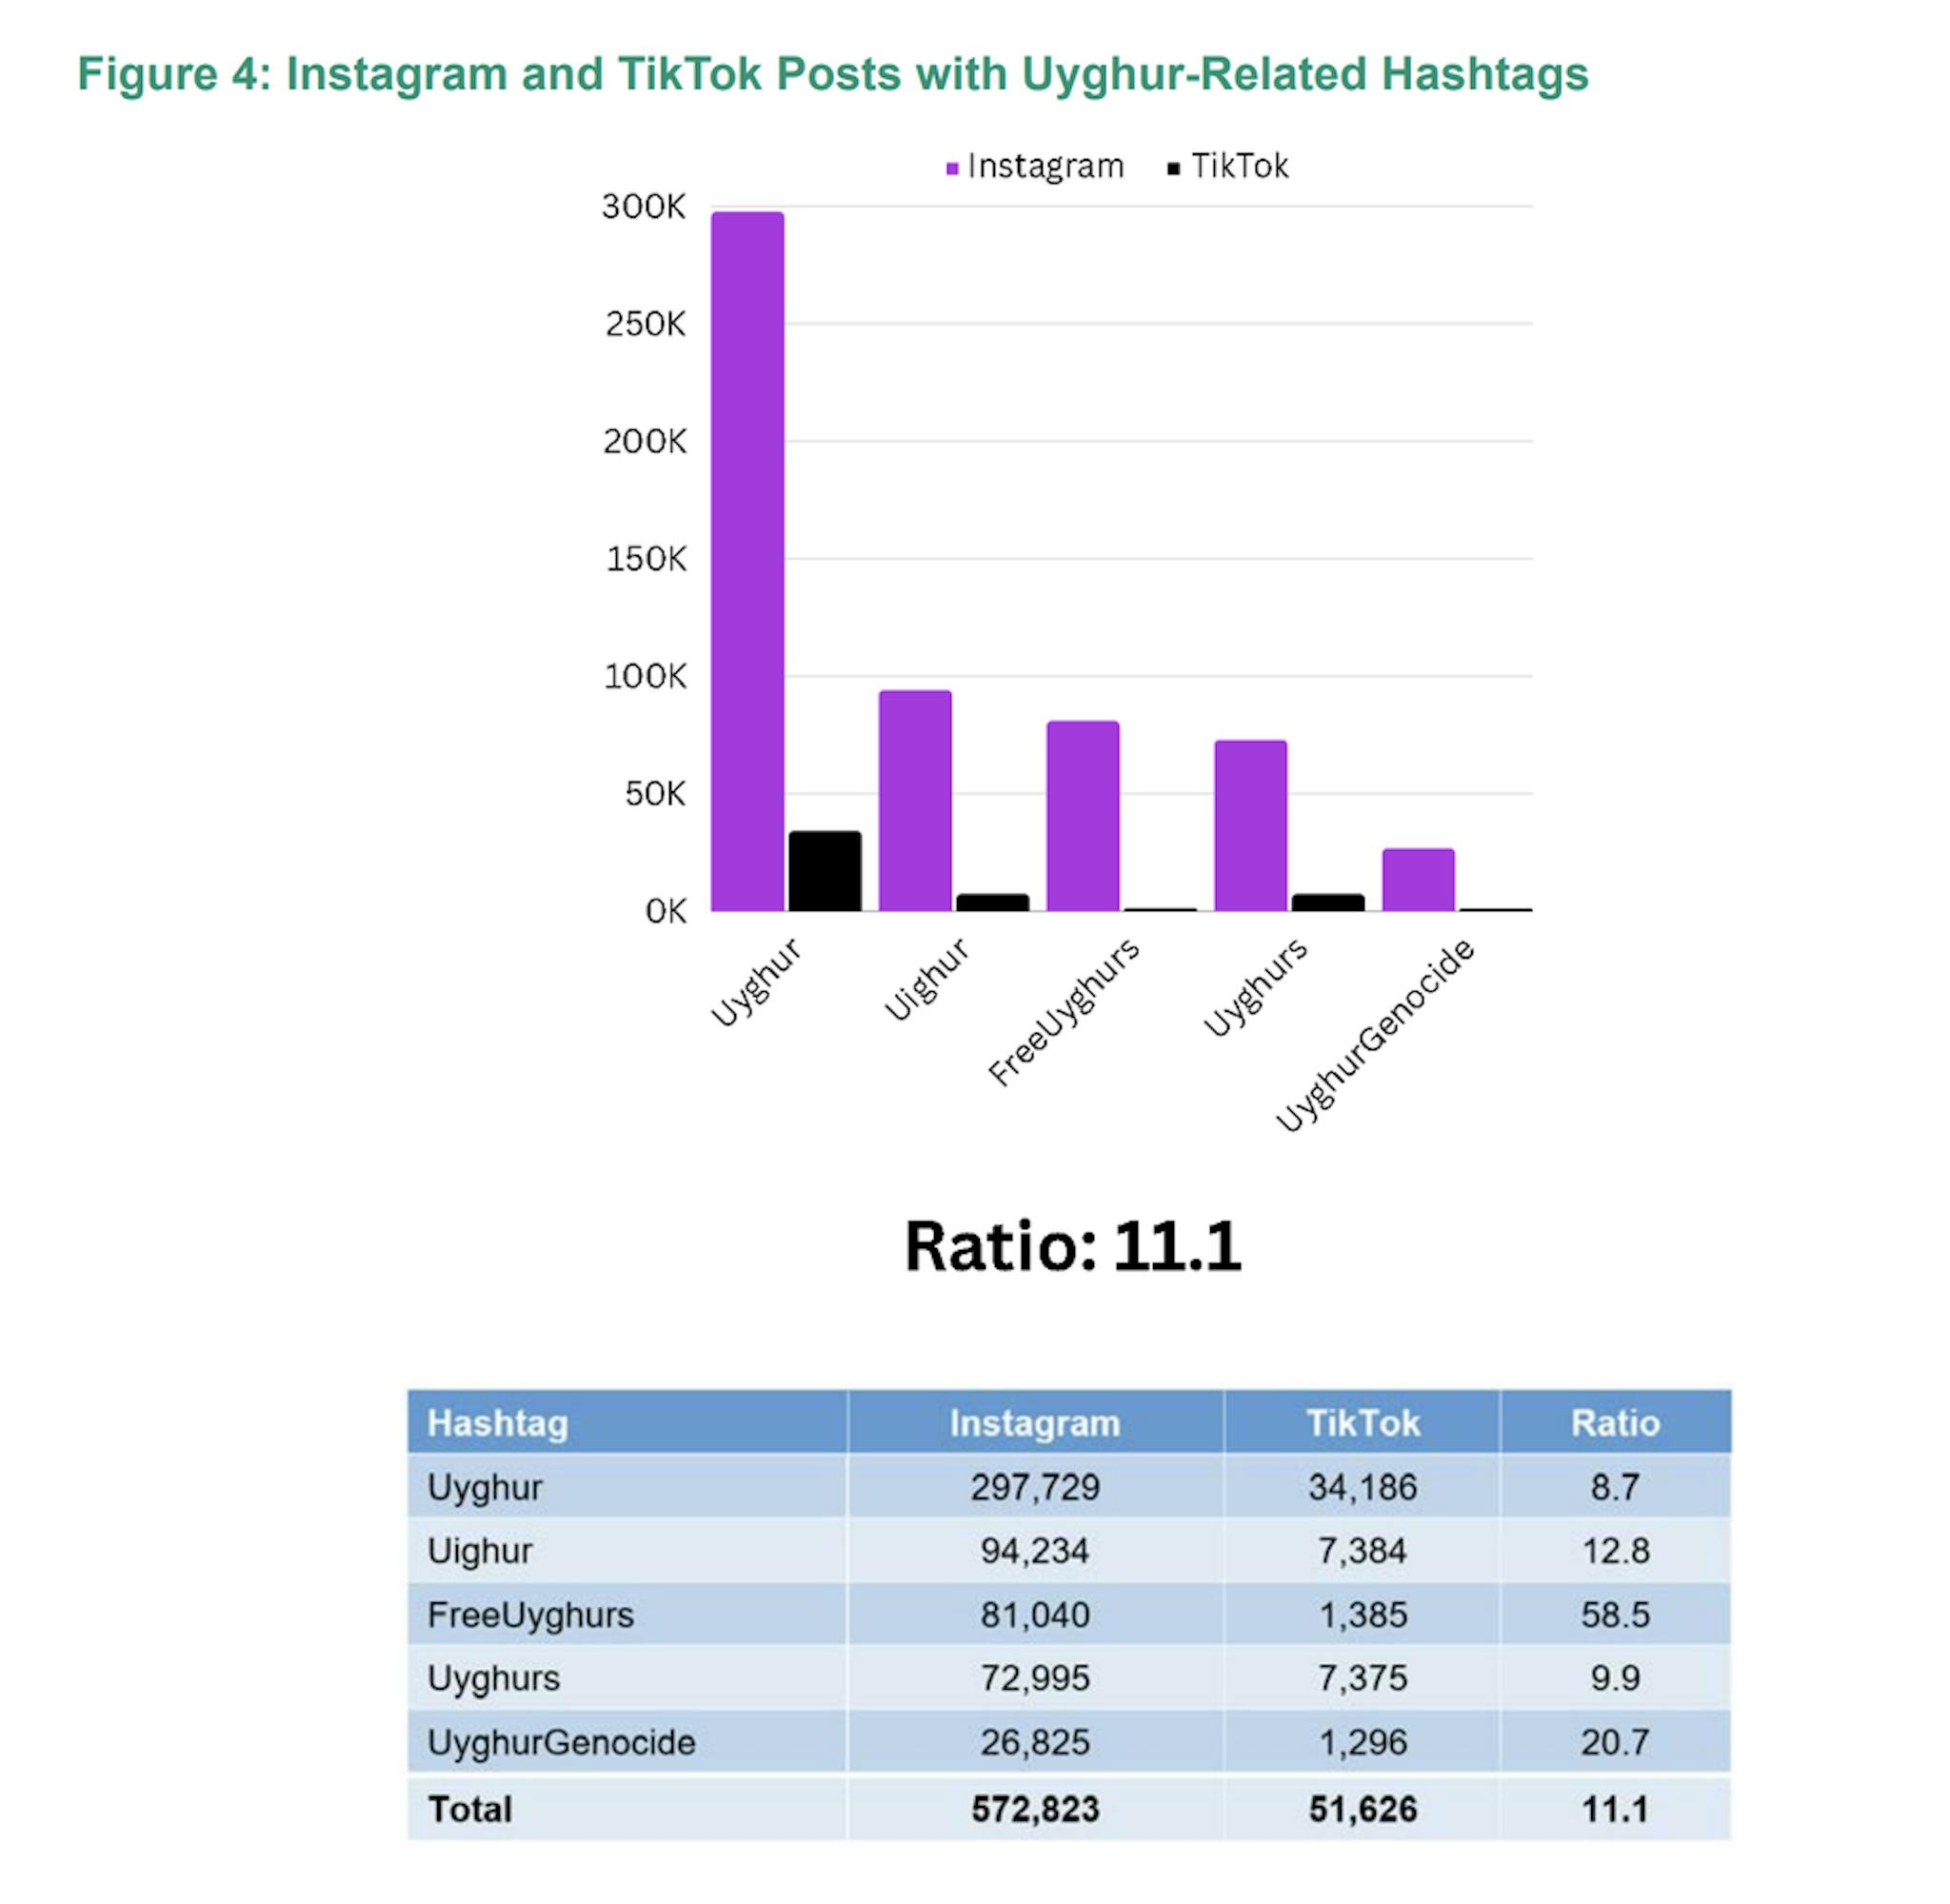 Total ratio of posts with Uyghur-related hashtags between the two platforms is 11.1. The hashtag with the highest ratio is freeuyghurs. Howver, for topics sensitive to the Chinese Government, the ratios were significantly higher (>10:1), suggesting potential manipulation in content promotion or suppression aligned with the Chinese Government's interests.